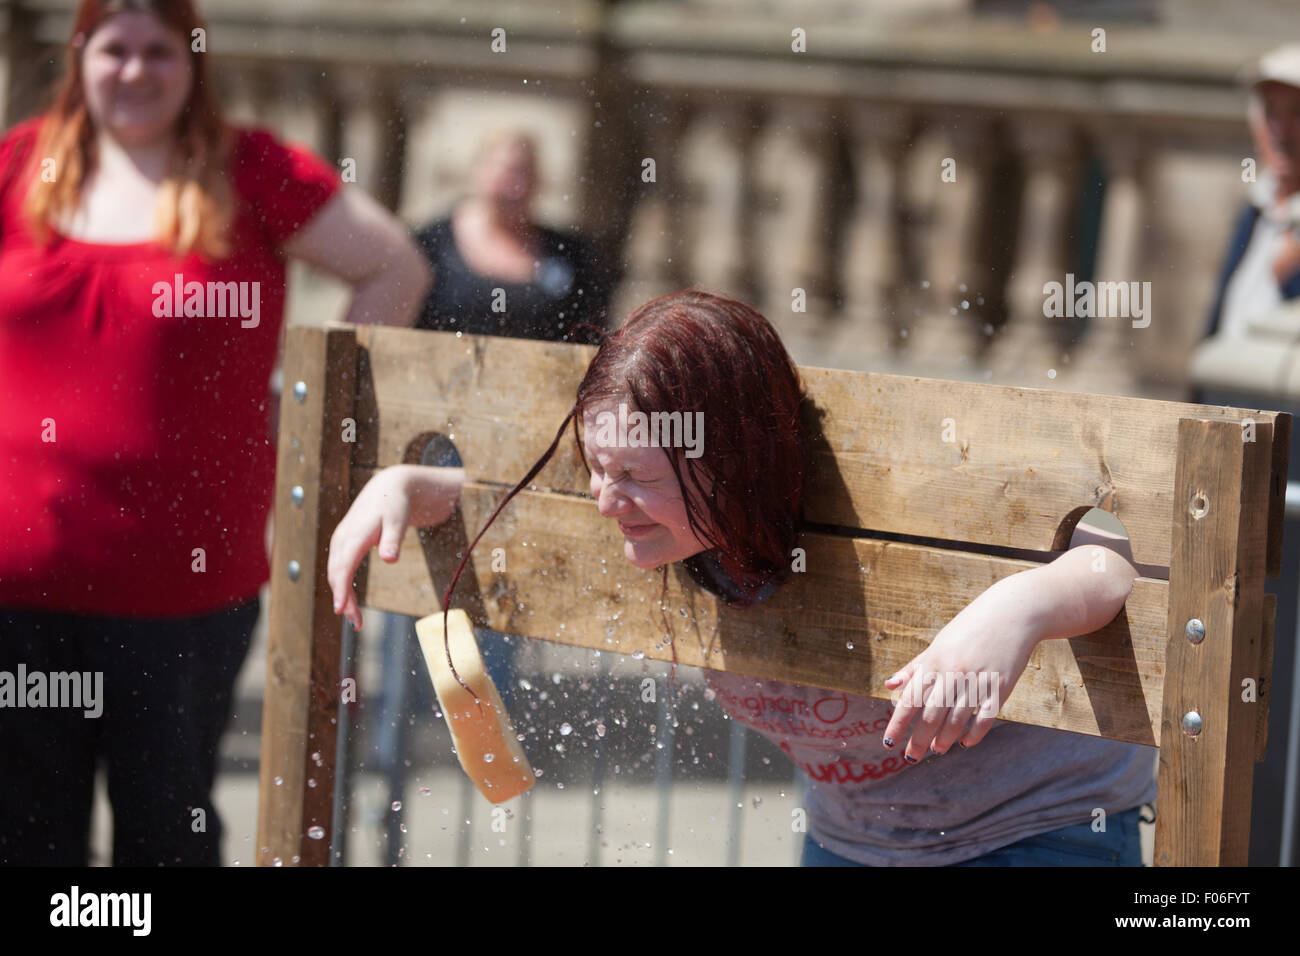 Birmingham, West Midlands, UK. 8th August, 2015. It was not all blood and gore. Raising money in the stocks with wet sponge throwing.  Credit:  Chris Gibson/Alamy Live News. Stock Photo